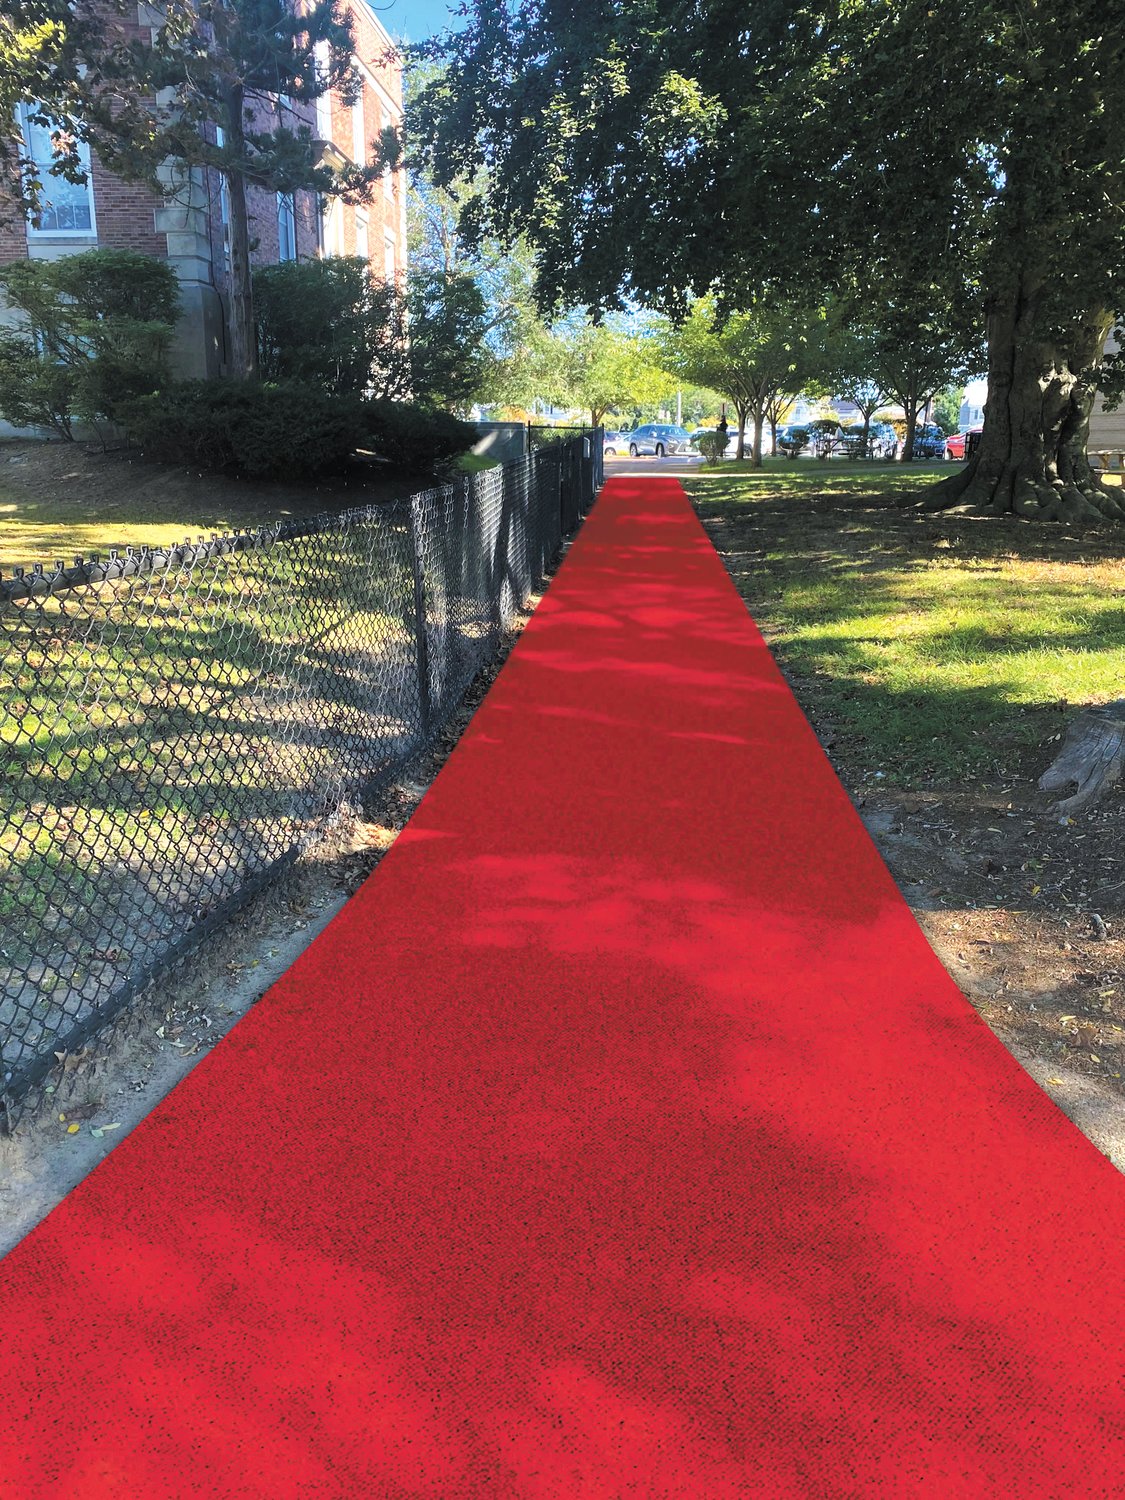 WALKING THE RED CARPET: The city will repurpose the street lights from Knightsville and put them along the walkway between City Hall and the Cranston Public Schools District building. The hops is to also install synthetic turf along the pathway to imitate a red carpet which individuals can use to get to the Park Theatre – it also connects individuals to Rolfe Square.